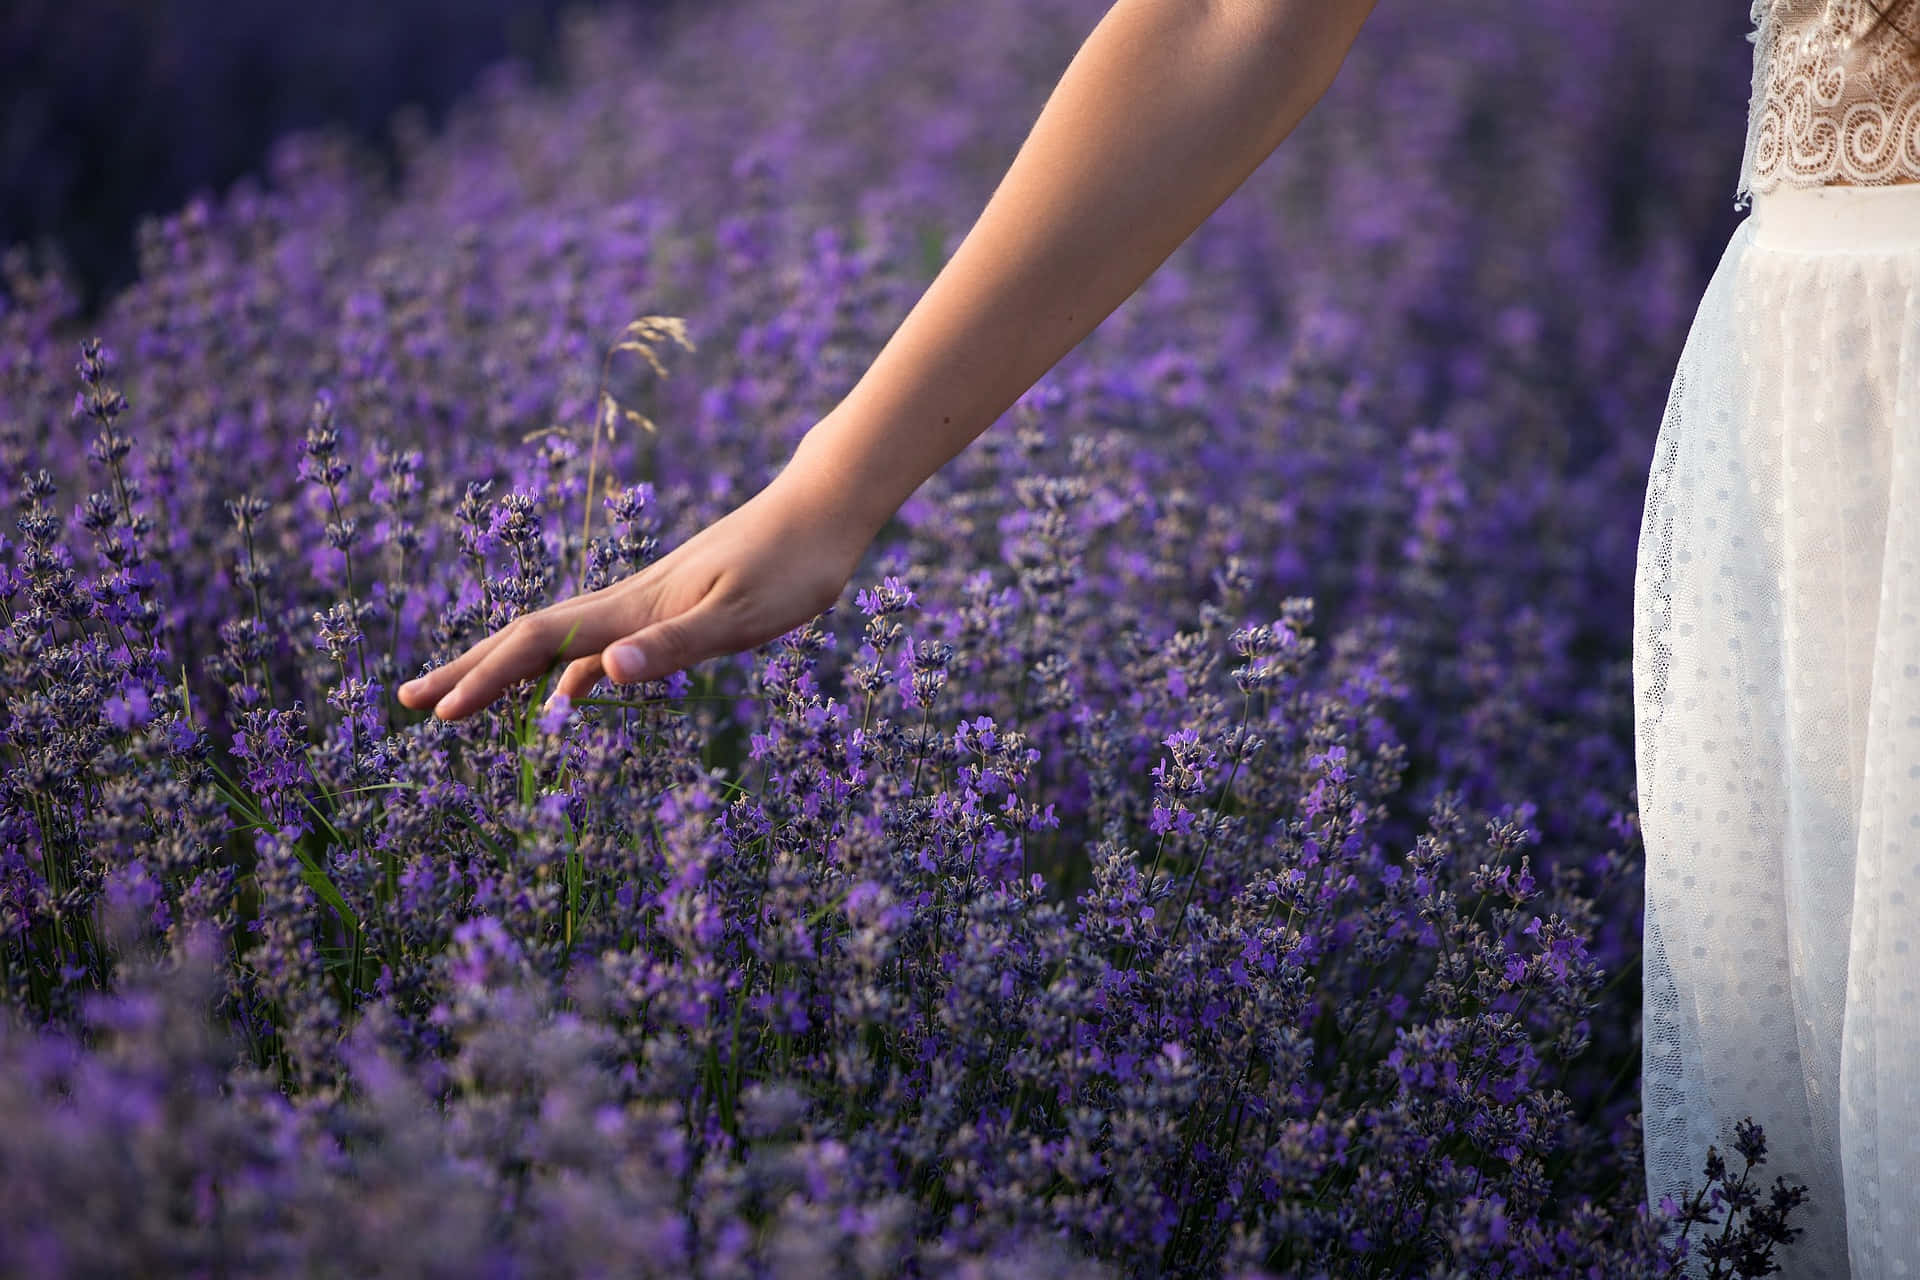 Stunning Photo Of Woman's Hand Touching A Tangible Field Of Lavender Wallpaper